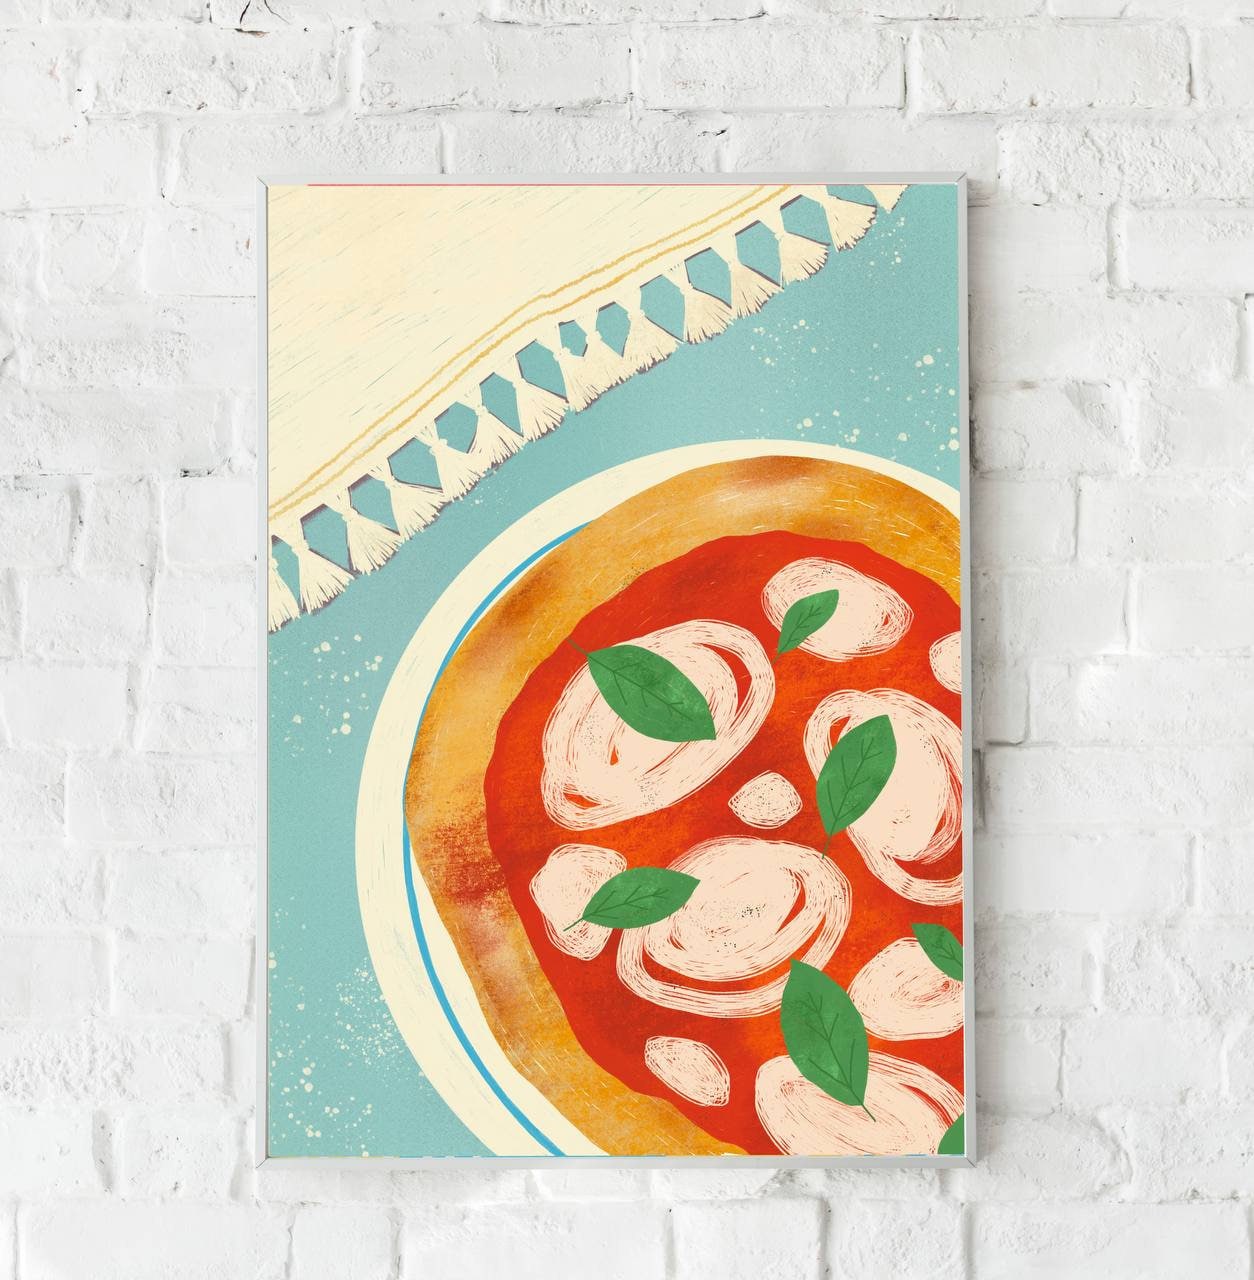 Retro Pizza Hot and Fresh Pizza Sign Restaurant Art Print by